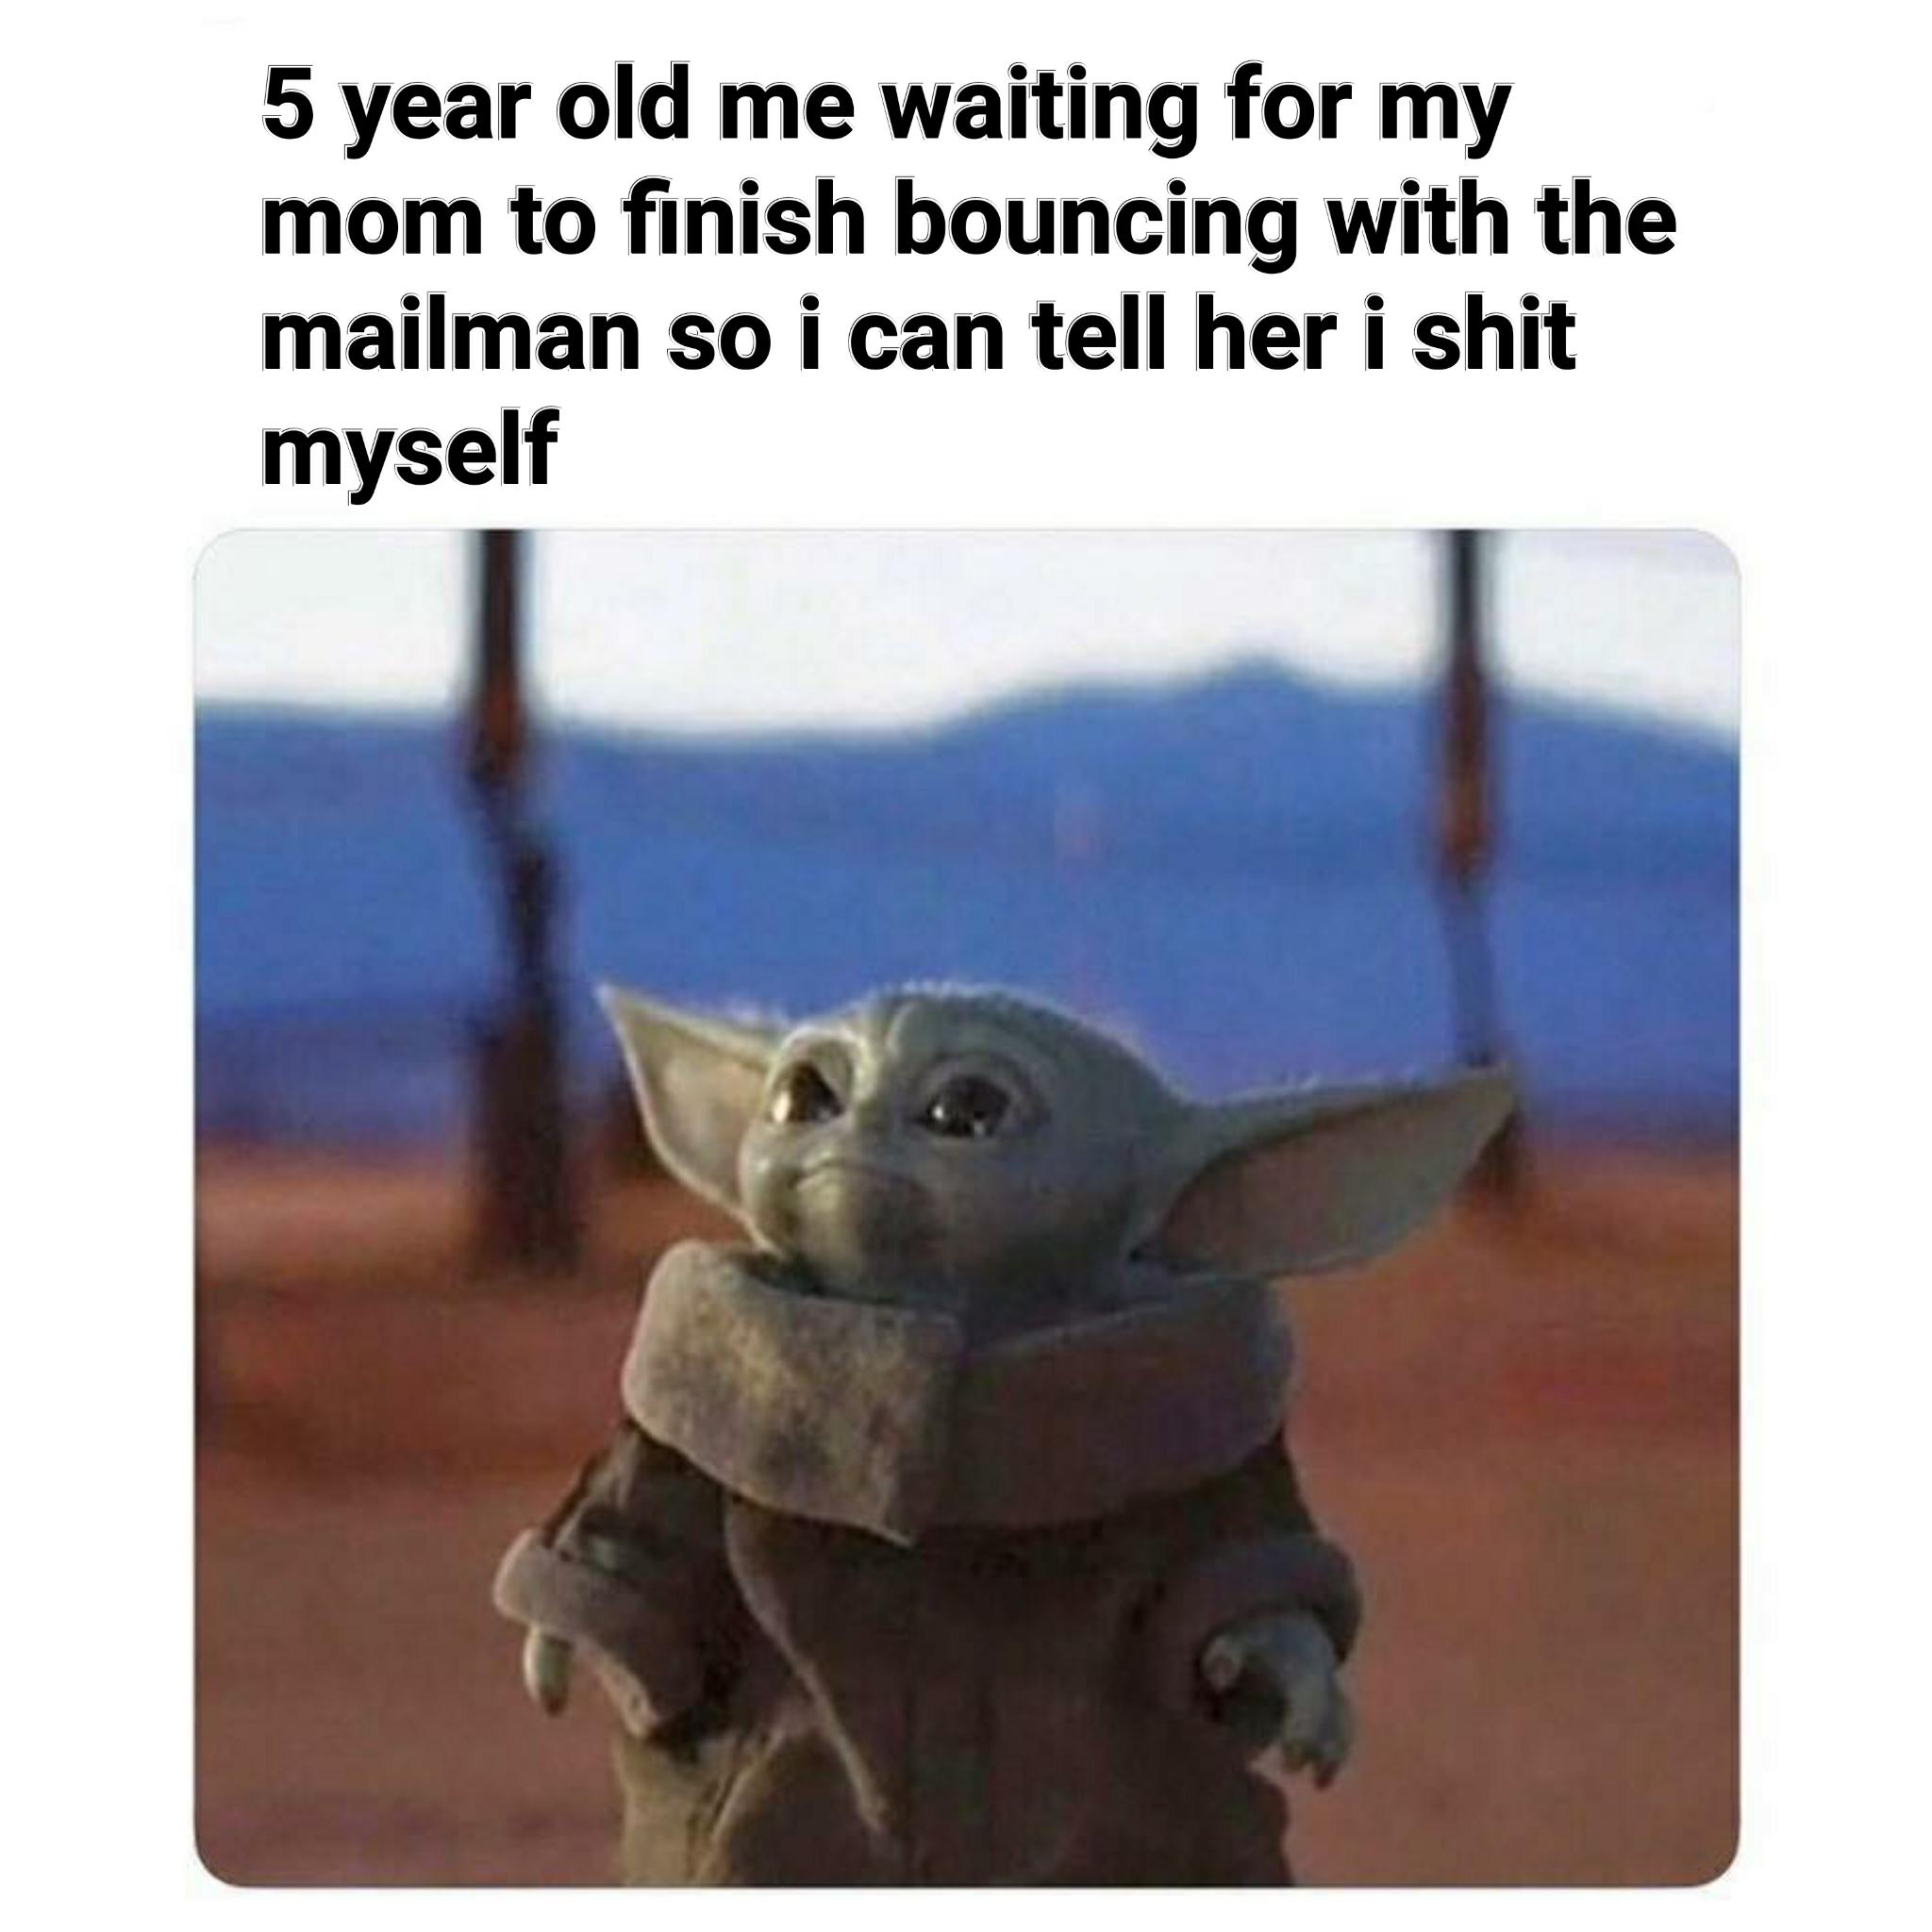 nsfw offensive-memes nsfw text: 5 year old me waiting for my mom to finish bouncing with the mailman so i can tell her i shit myself 